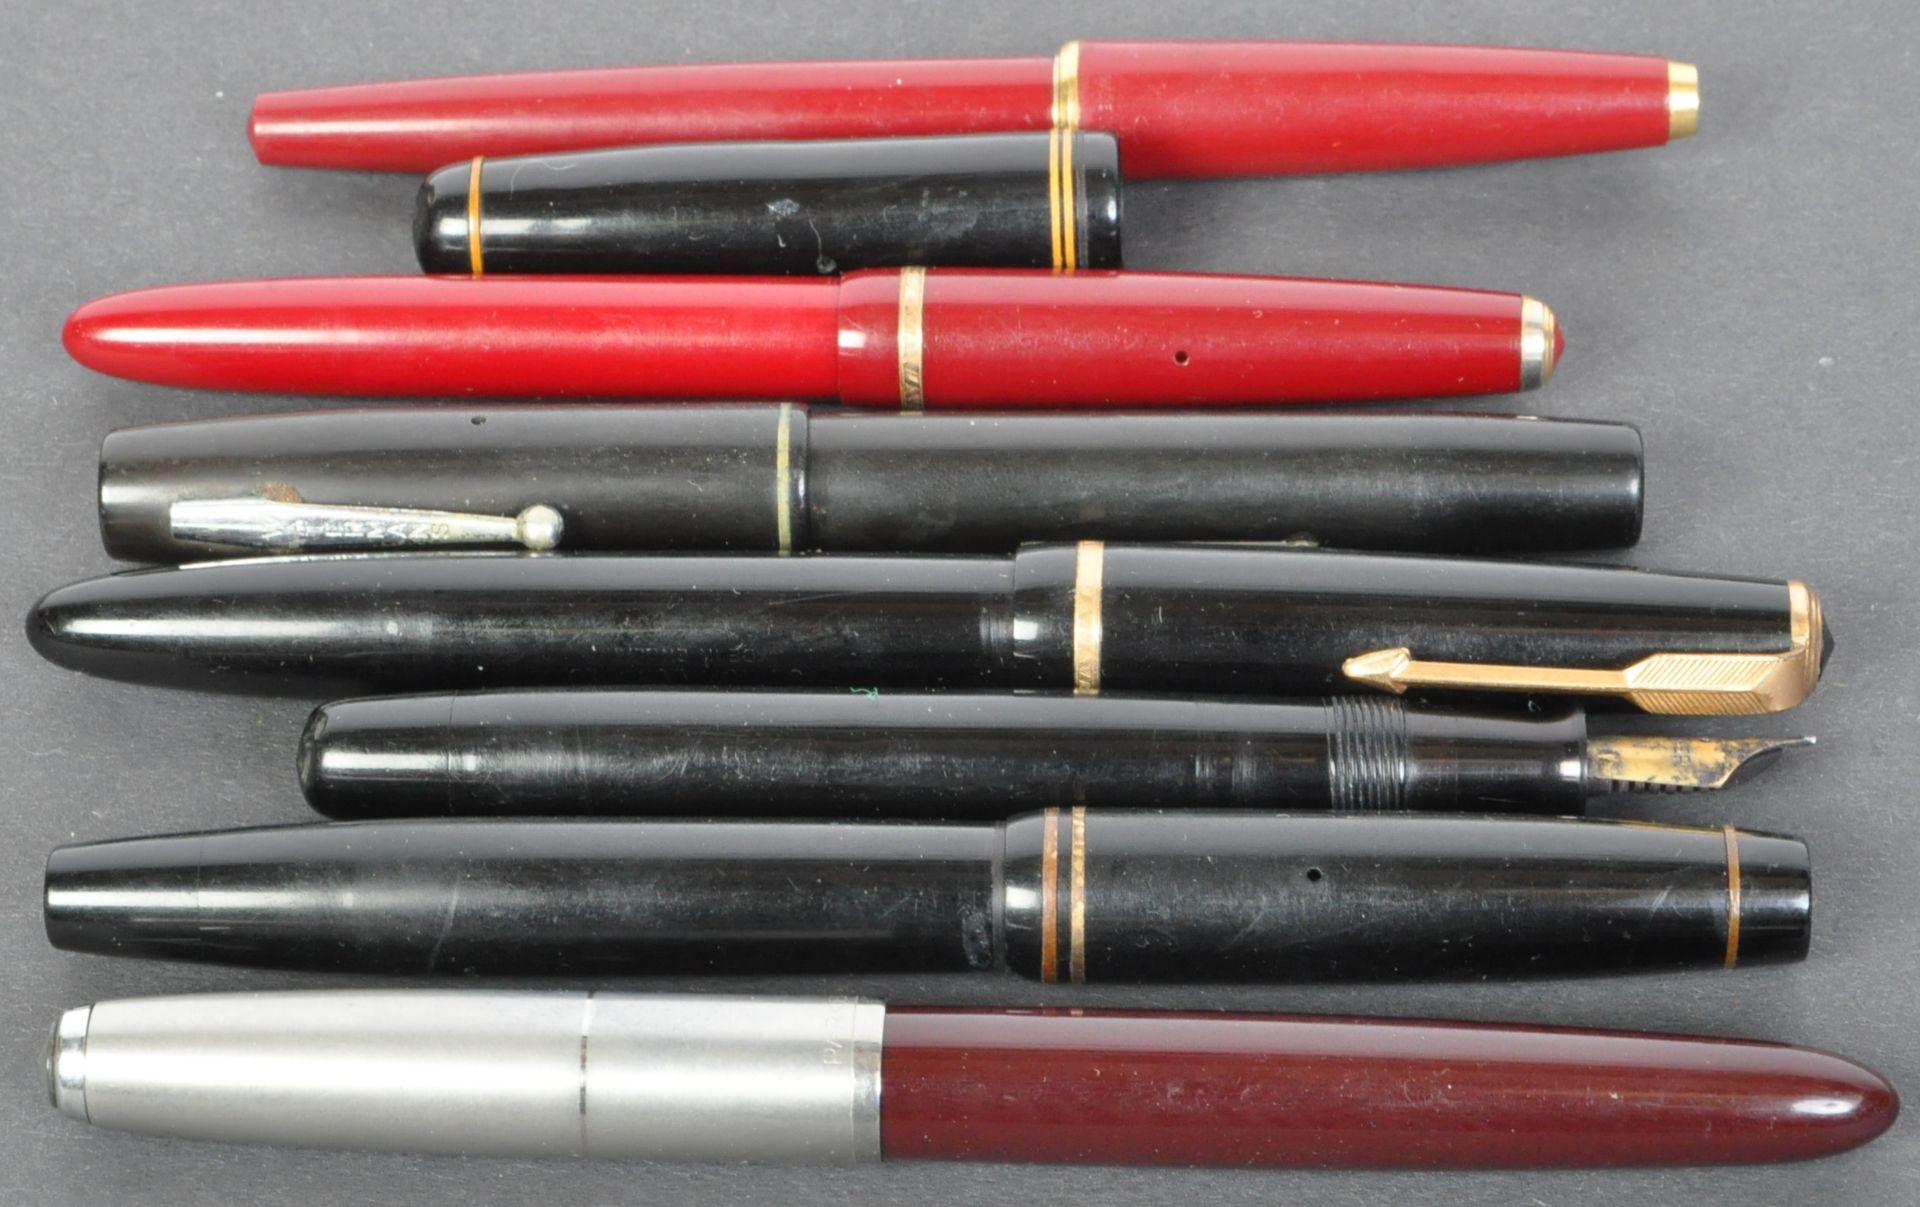 COLLECTION OF VINTAGE 20TH CENTURY FOUNTAINS PENS - PARKER ETC